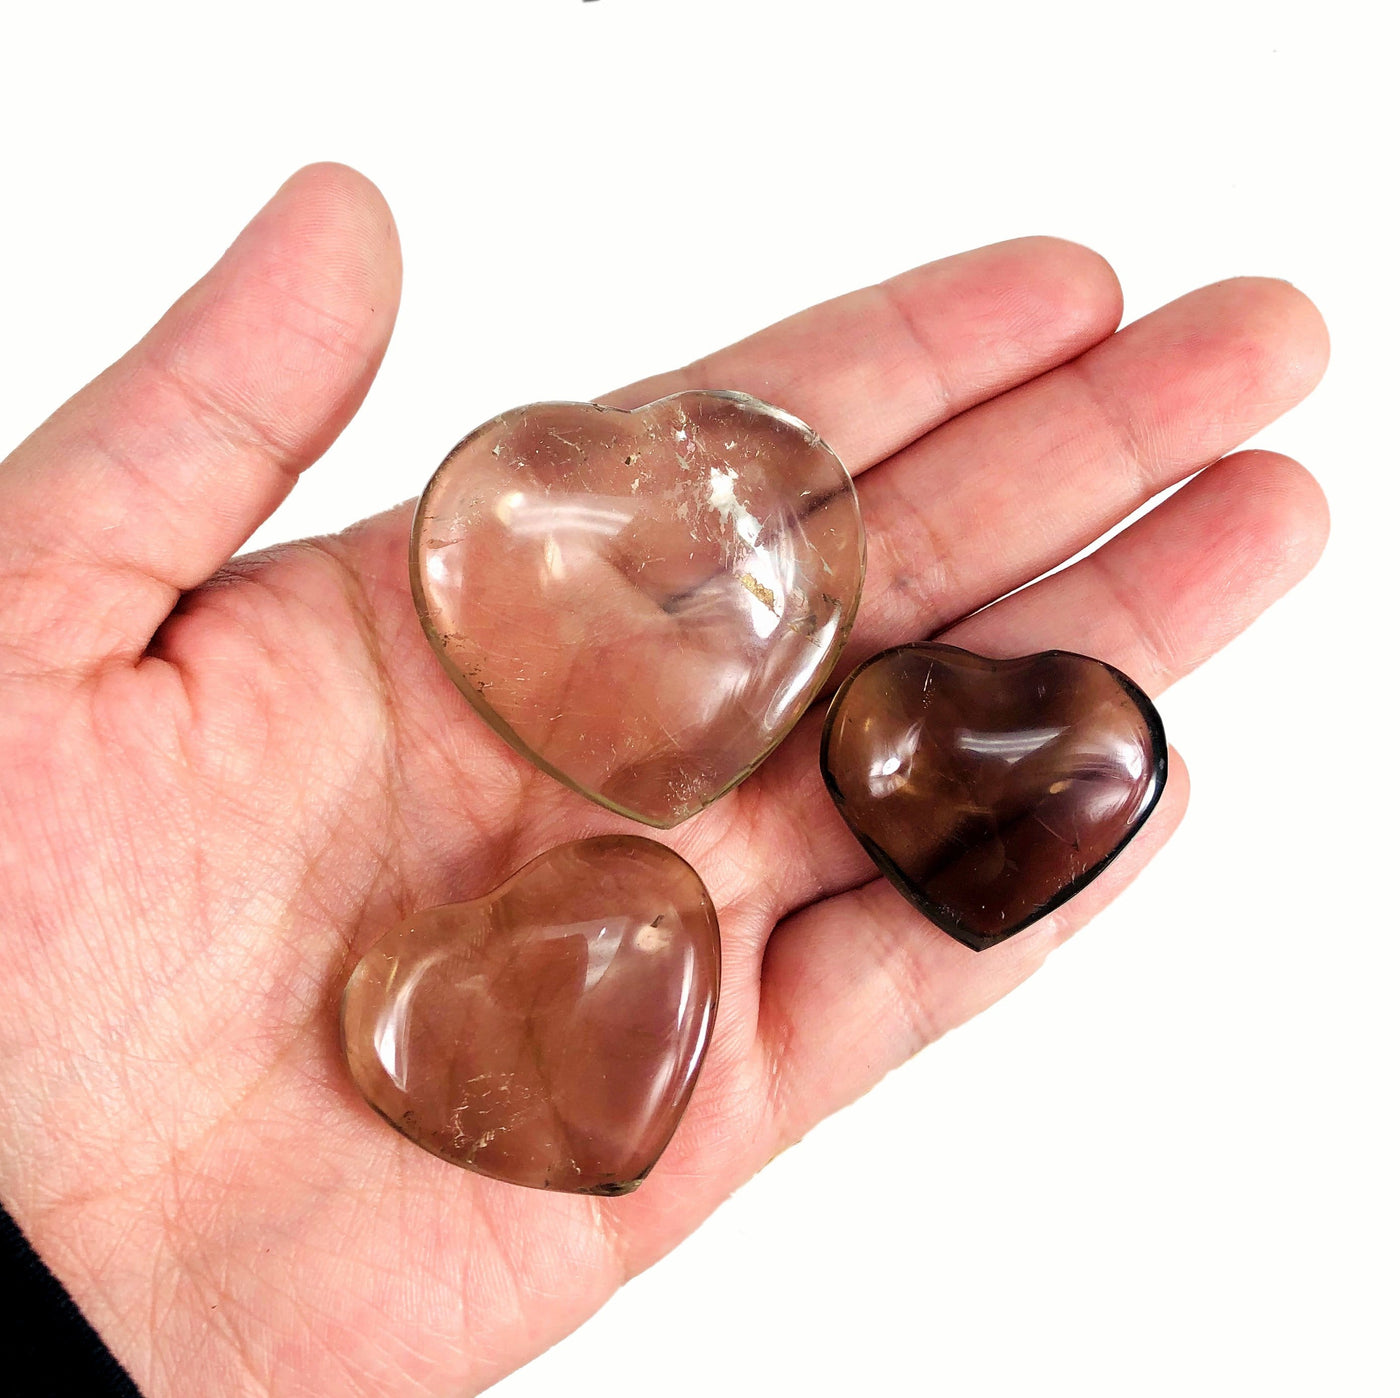 3 Smokey Quartz Polished Hearts on a hand to show size reference 